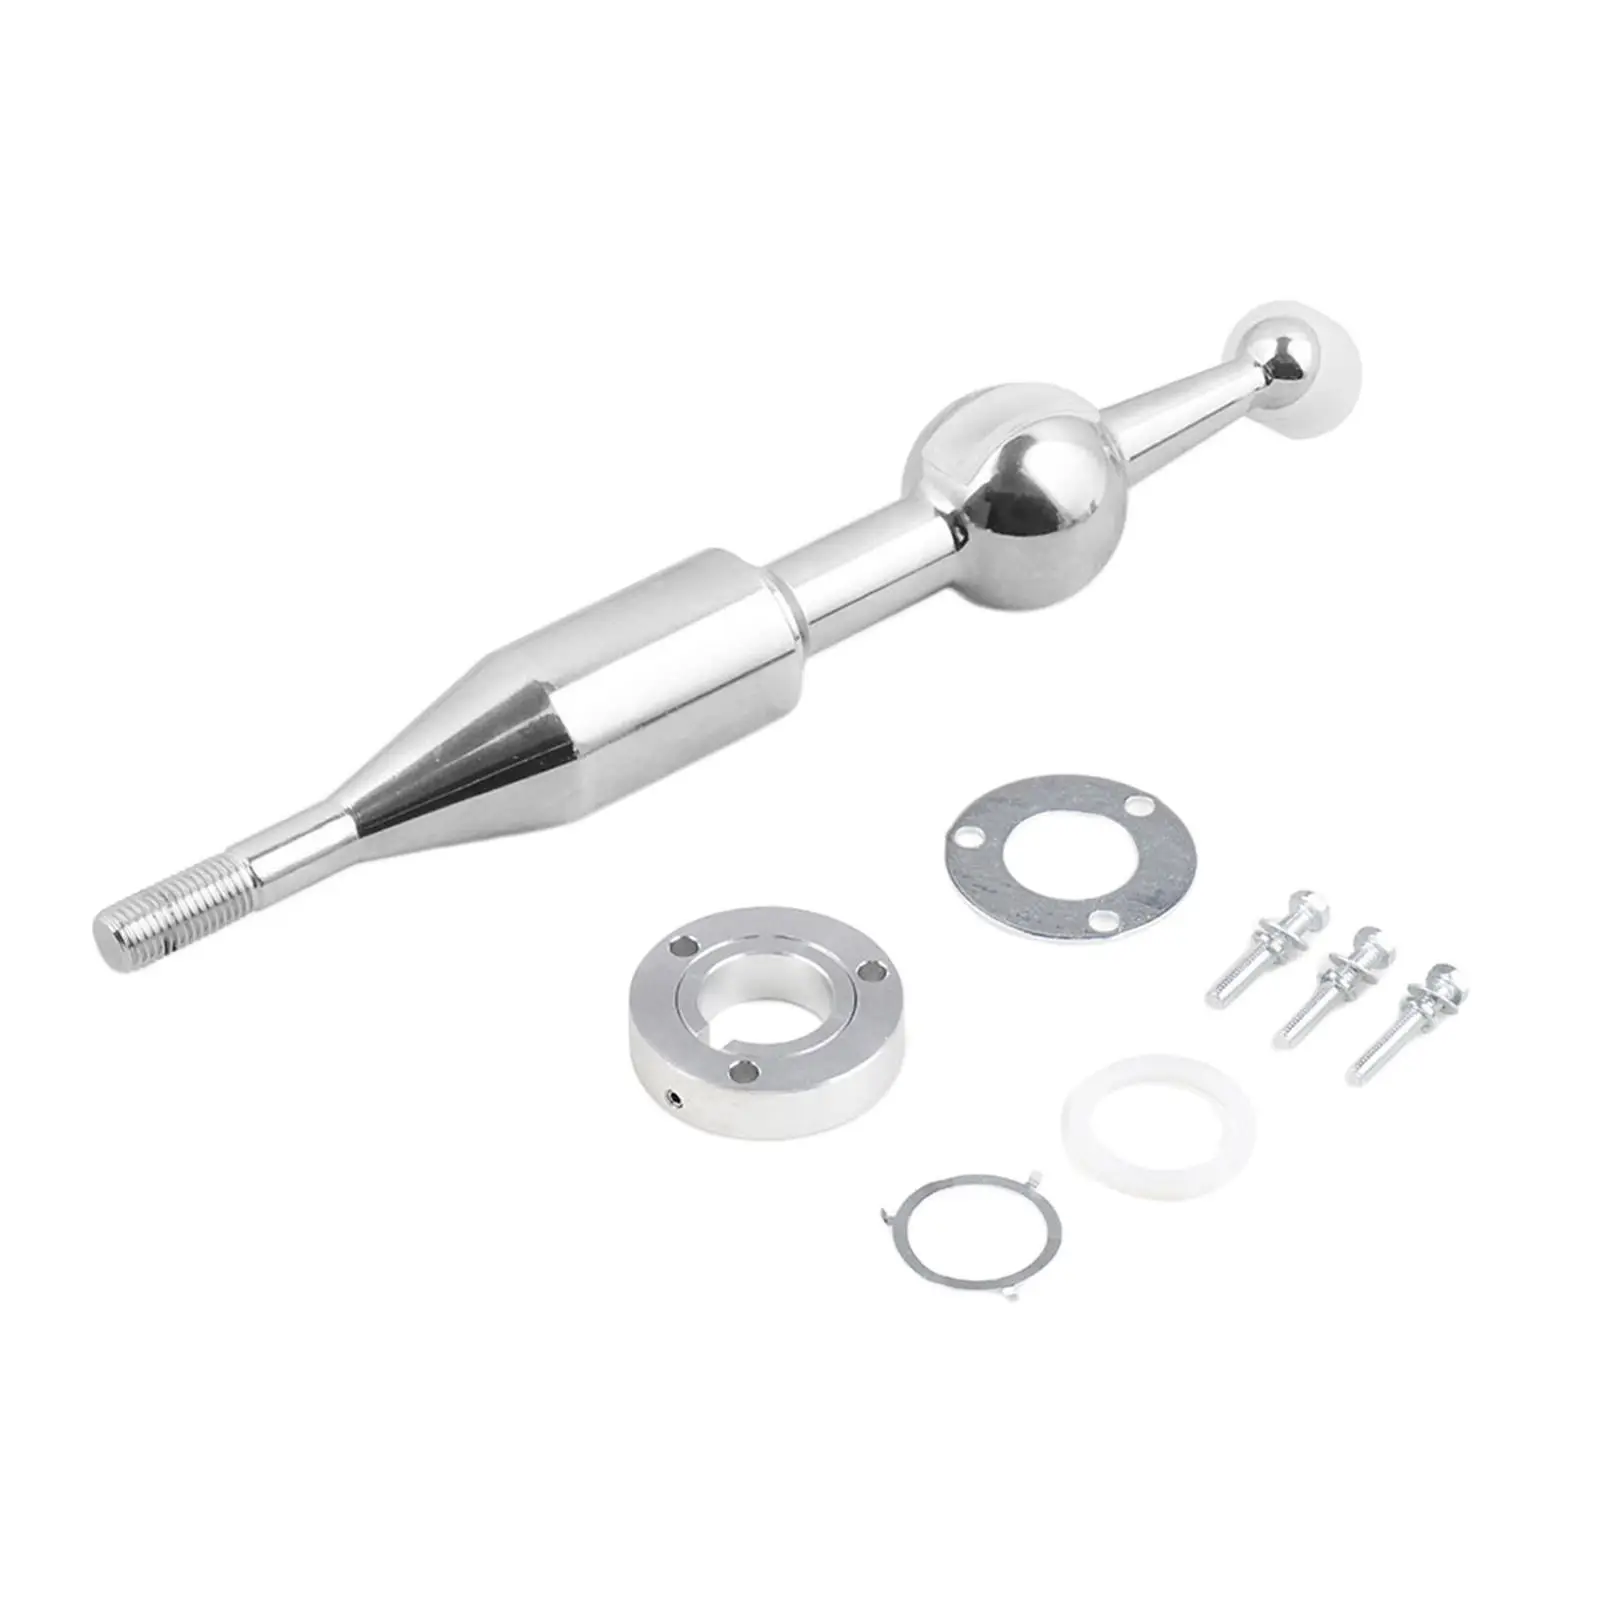 Shifter Gear Lever Silver Direct Replacement Car Accessories Modified Manual Transmission Kit Fit for Mazda RX-7 1986-1991